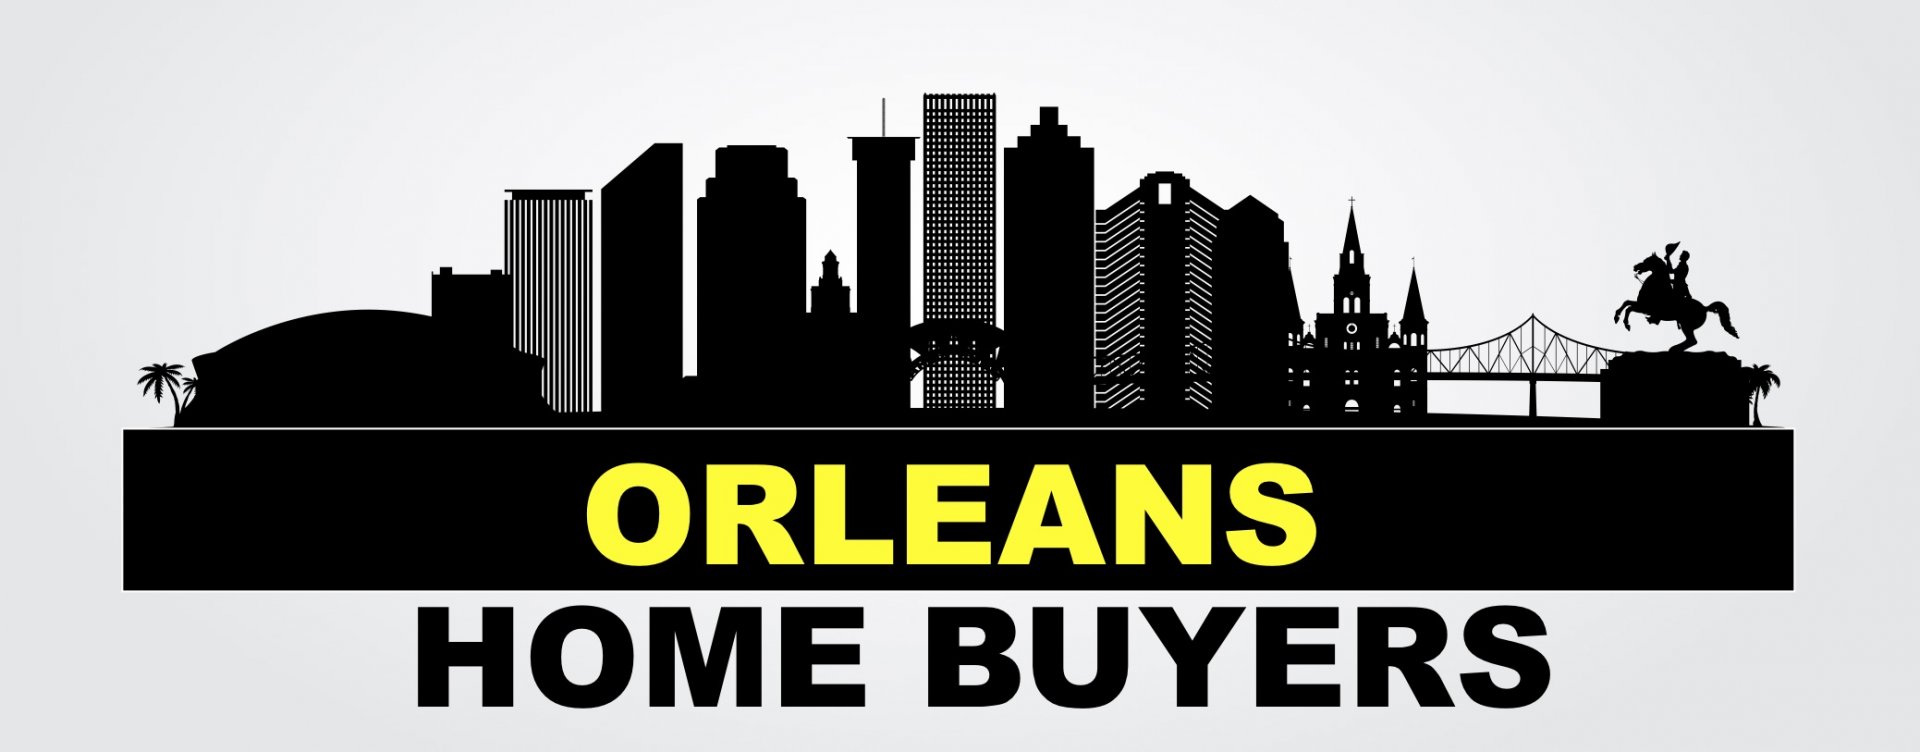 New Orleans Home Buyers logo